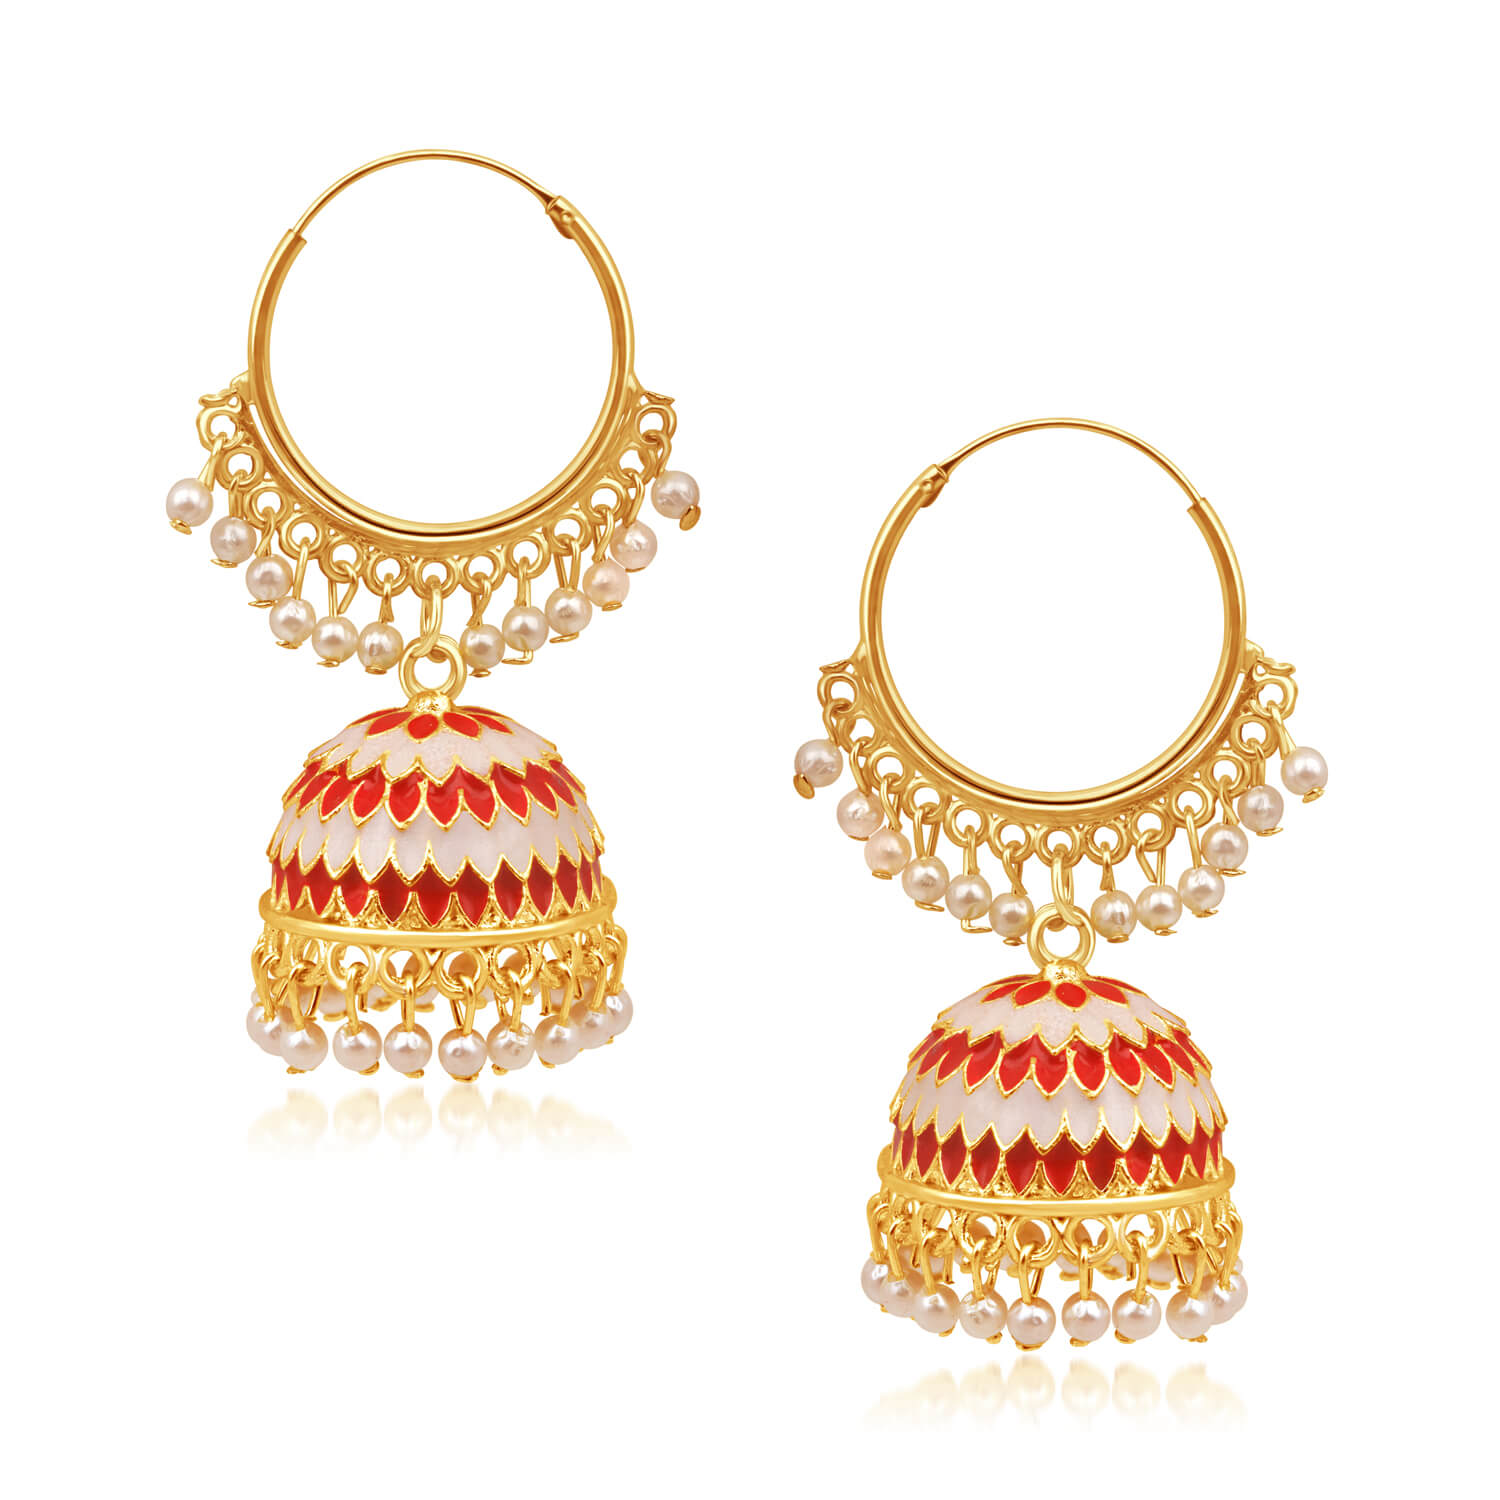 Retro Bollywood Style Traditional Indian Kashmiri Jhumka Earrings Online  Jewelry With Small Beads Jhumki Jhumka Earrings For Women Party Gift From  Idealway, $1.31 | DHgate.Com